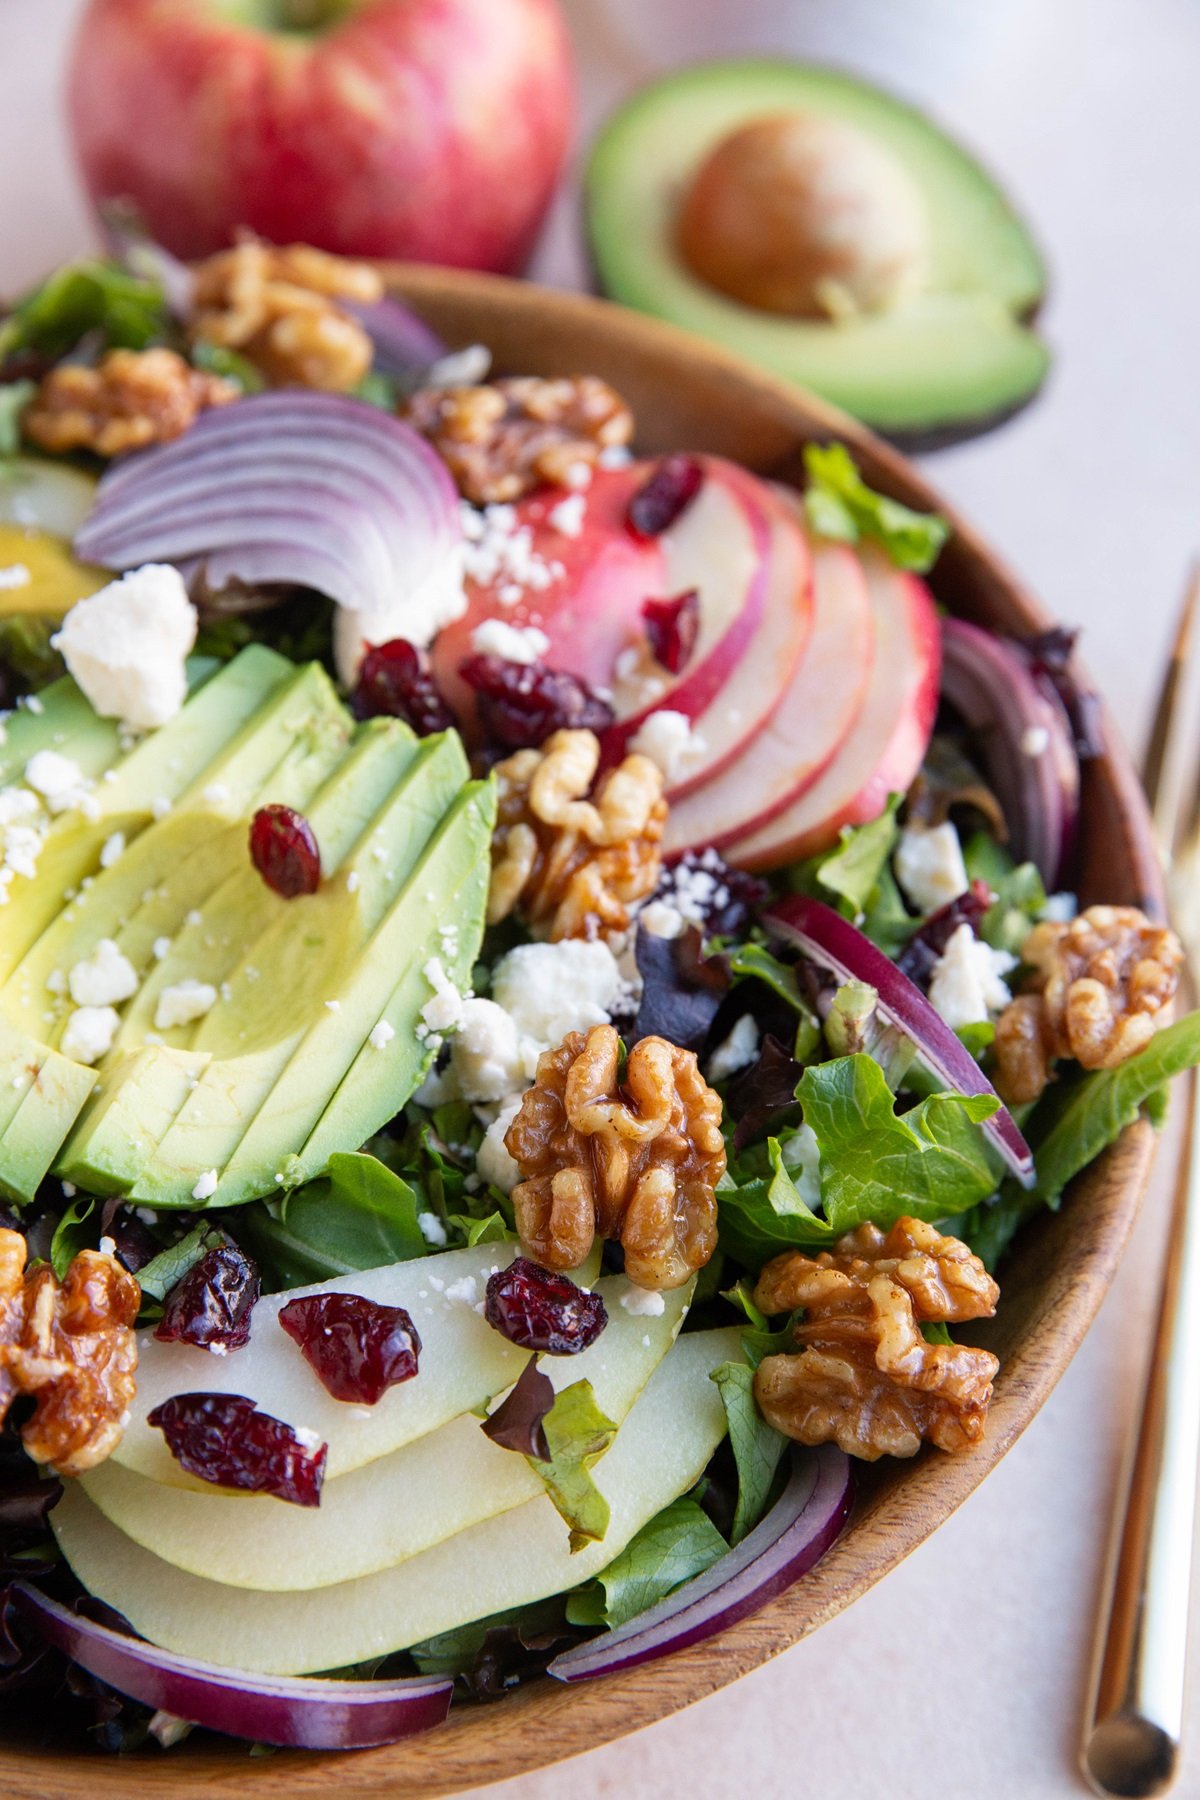 Bowl of salad with pears, apples, walnuts, etc and fresh apple and avocado in the background.